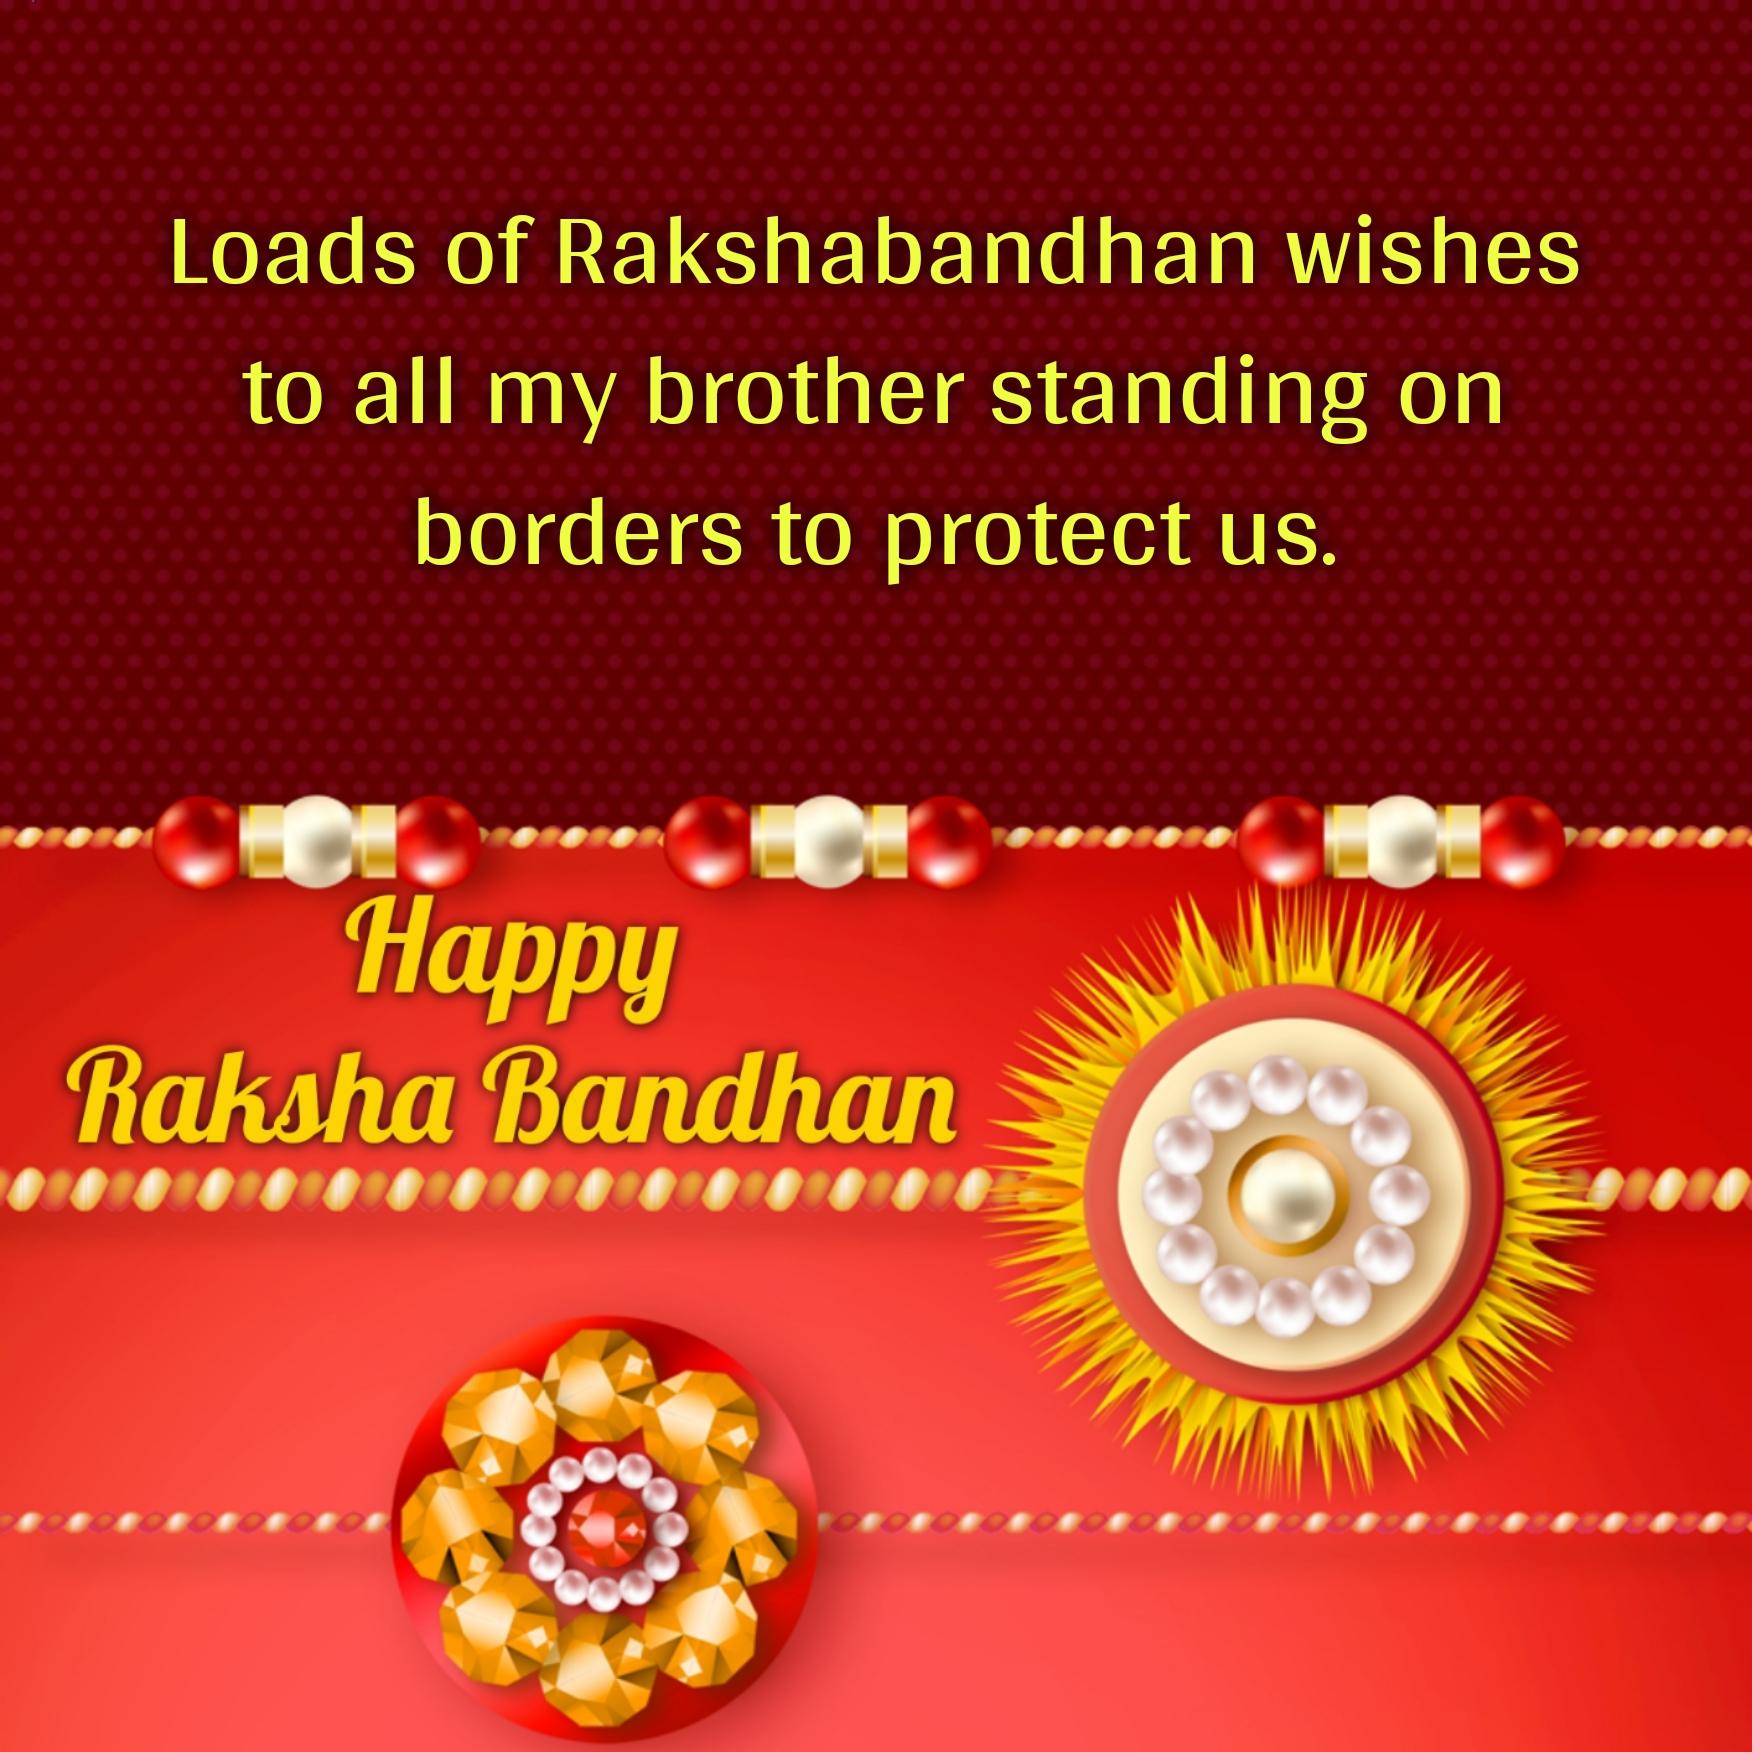 Loads of Rakshabandhan wishes to all my brother standing on borders